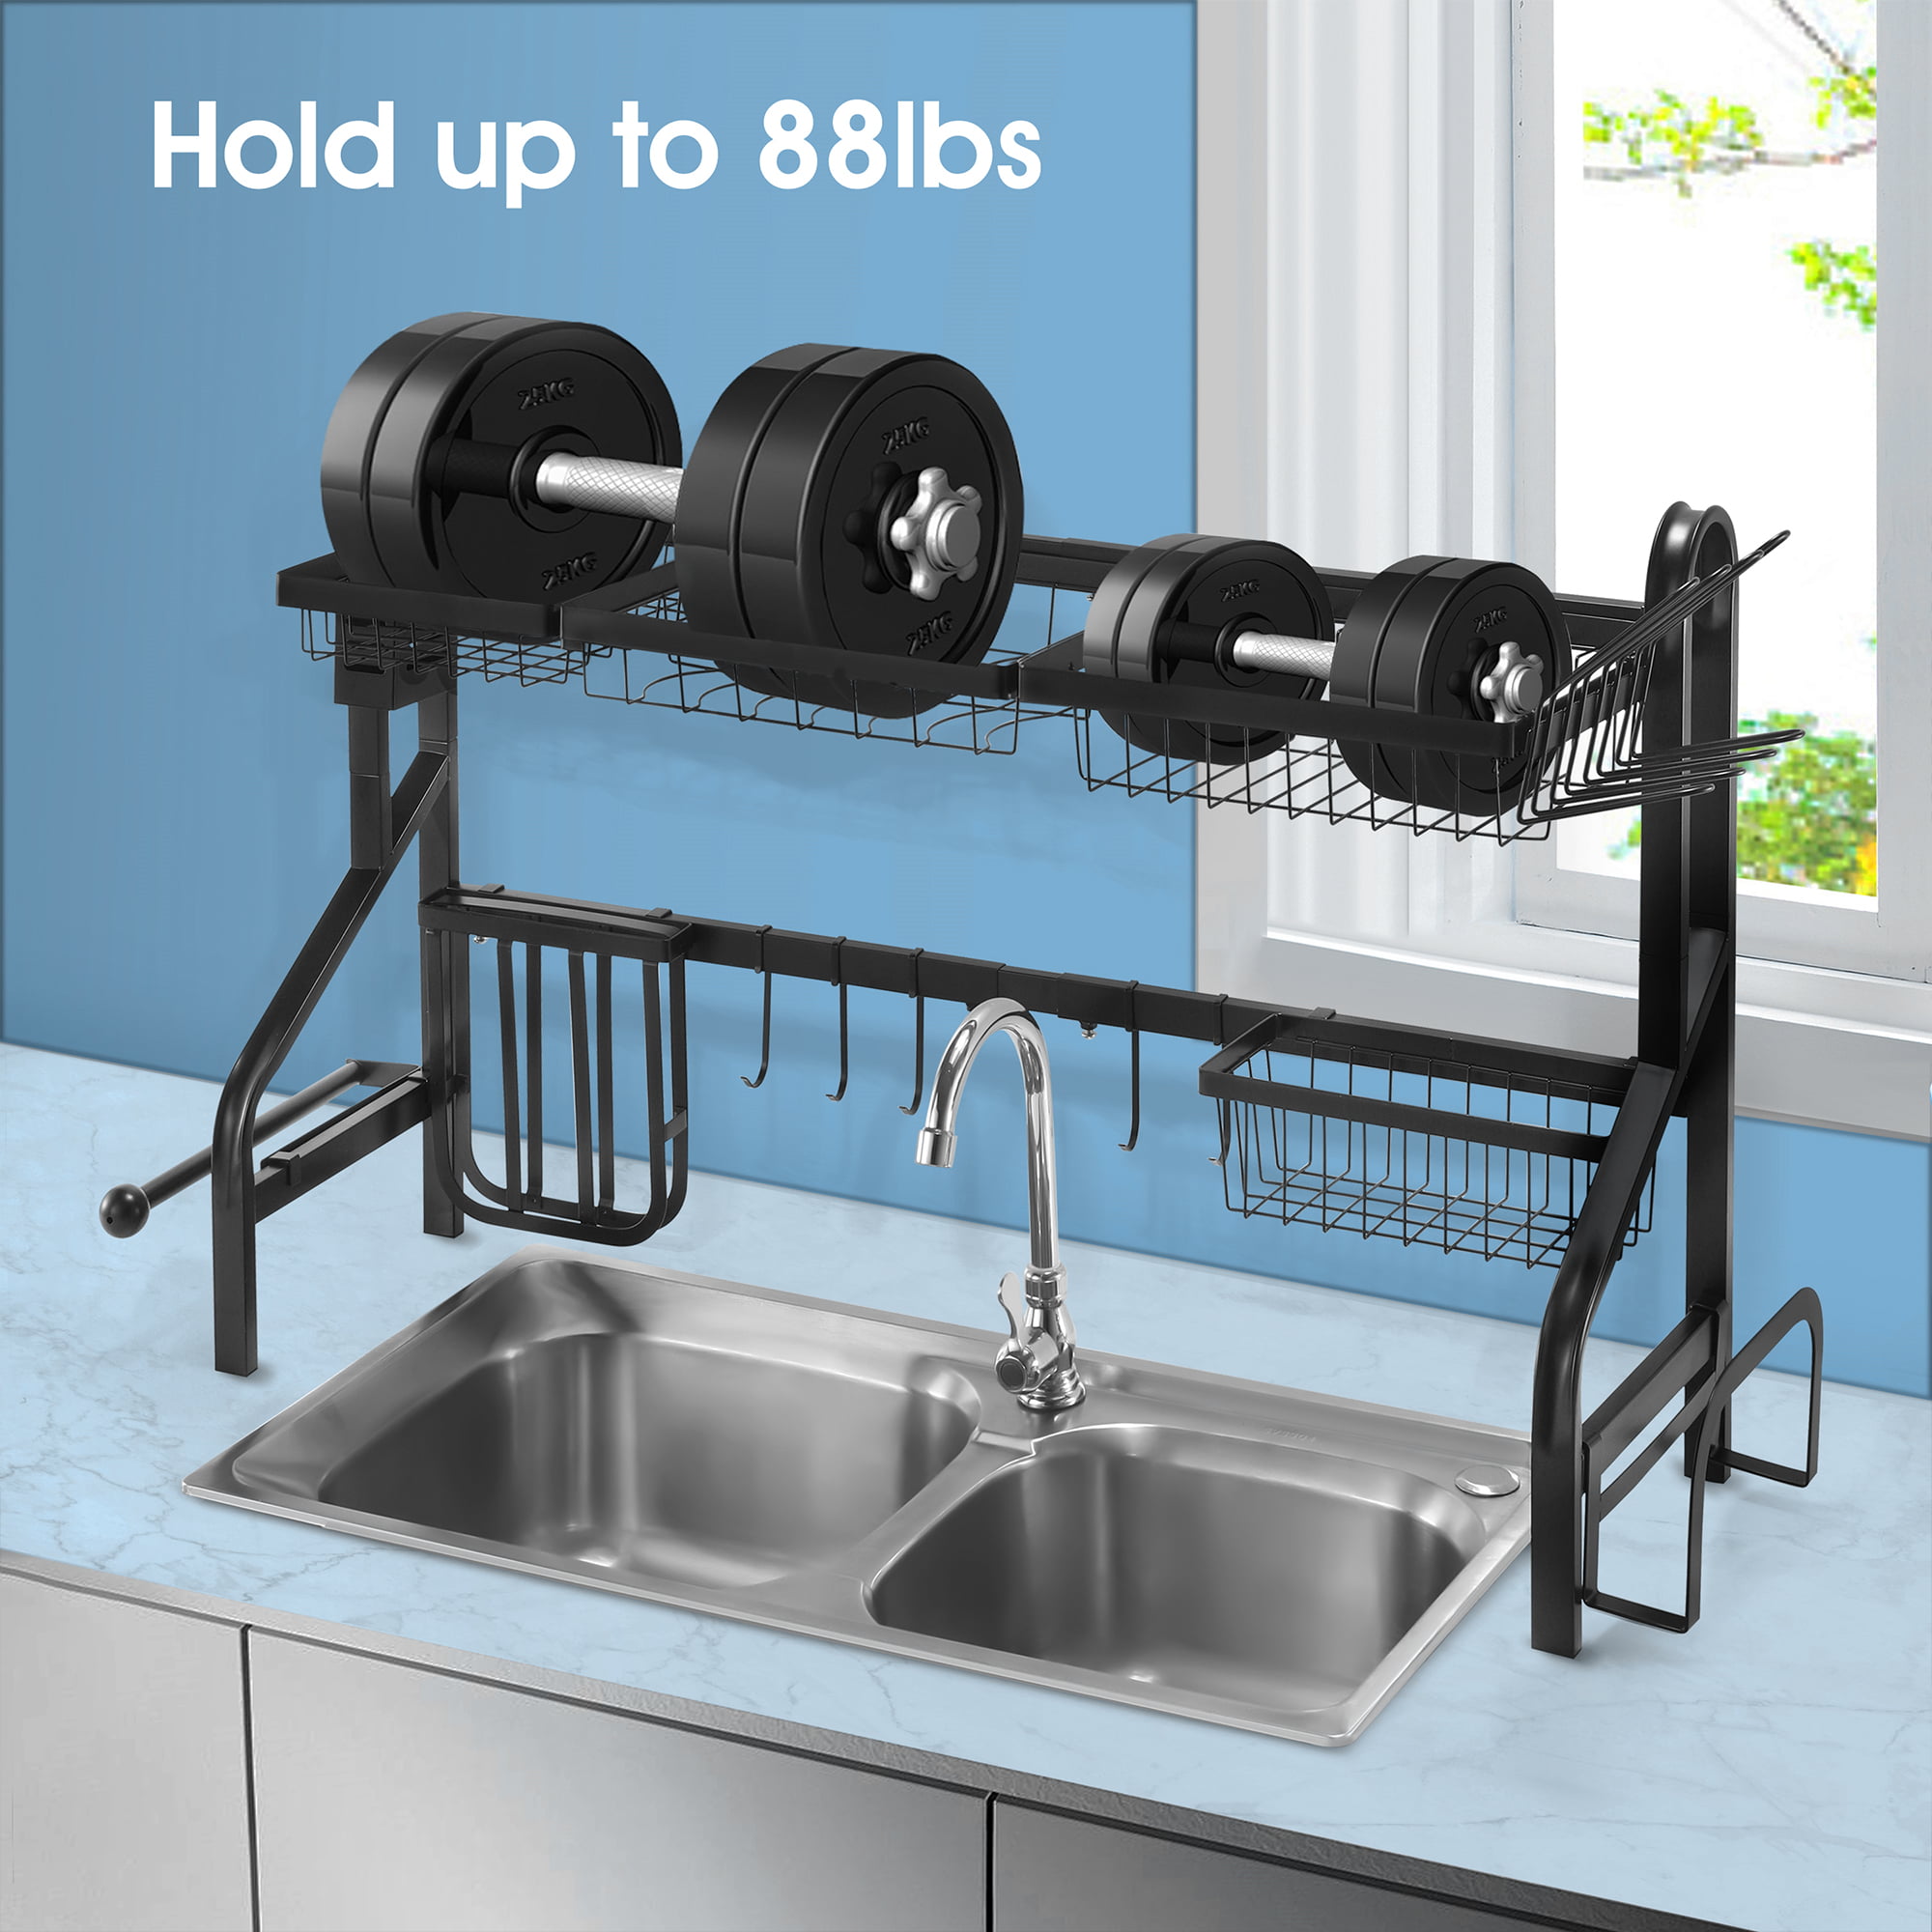 Yoleduo Over The Sink Dish Drying Rack - Space-Saving Kitchen Sink Rack  with Shelf and Drainer Perfect for Above Sink and Over The Counter Dish  Rack